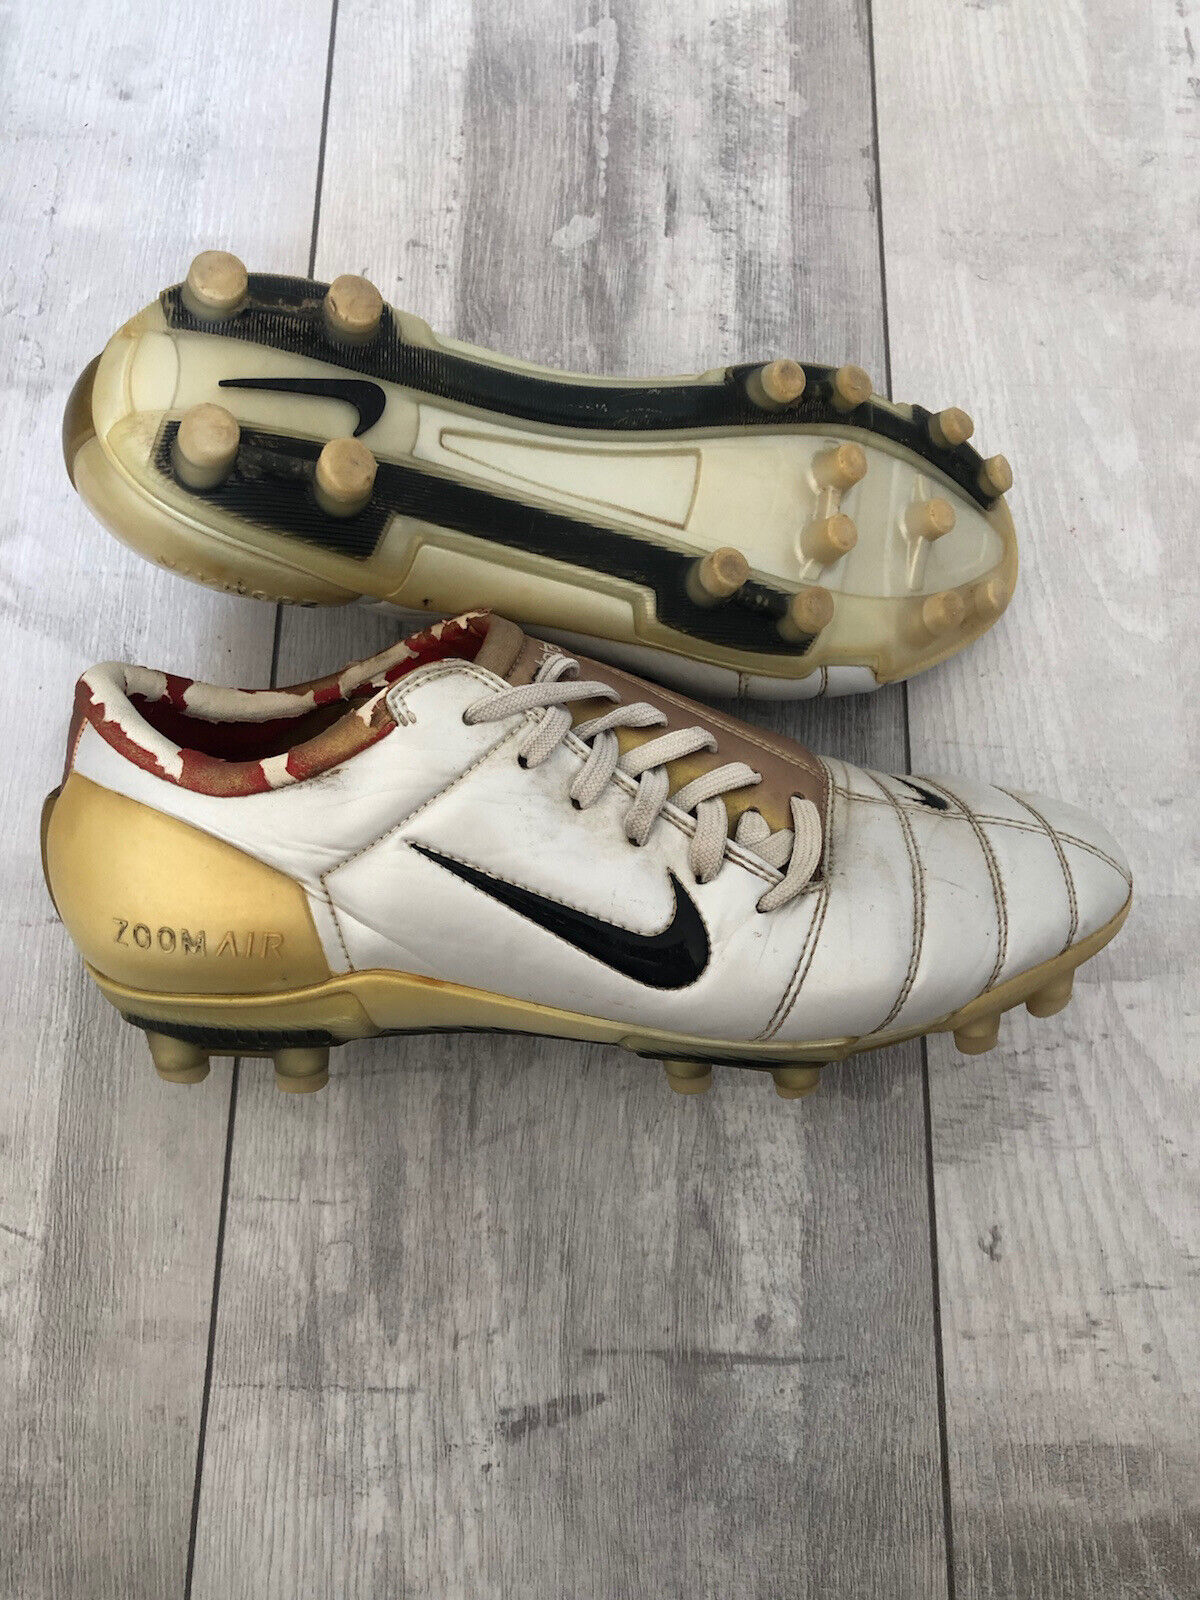 Nike Total 90 Air Zoom FG White Gold Football Soccer Cleats US8 Professional